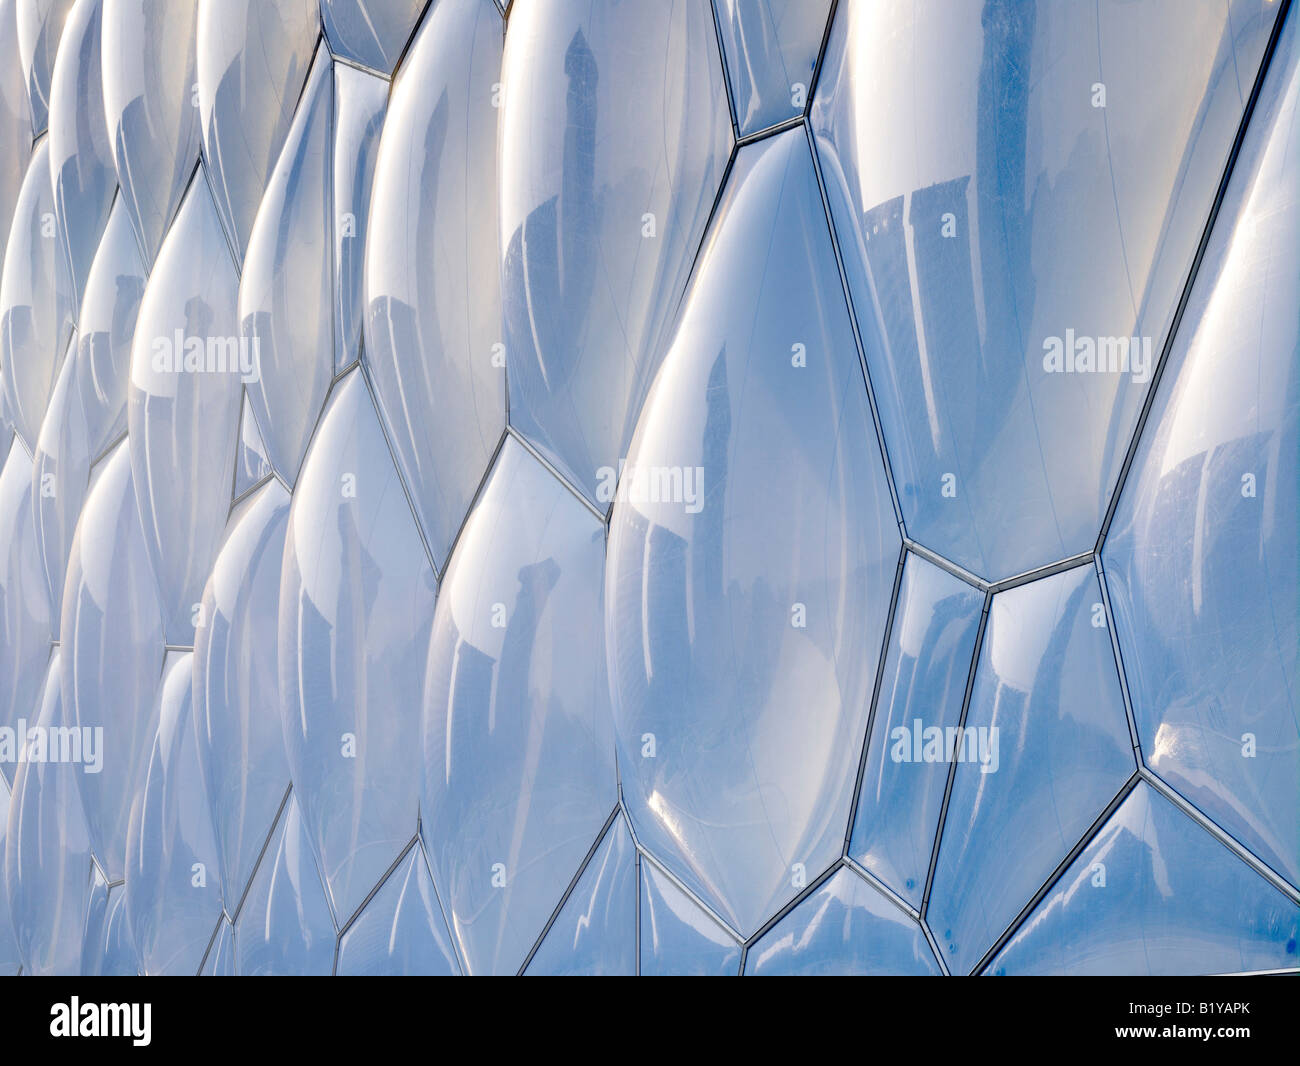 National Aquatics Center, Beijing, China - The Water Cube. PTW Architects, Arup, CSCEC and CCDI. Stock Photo